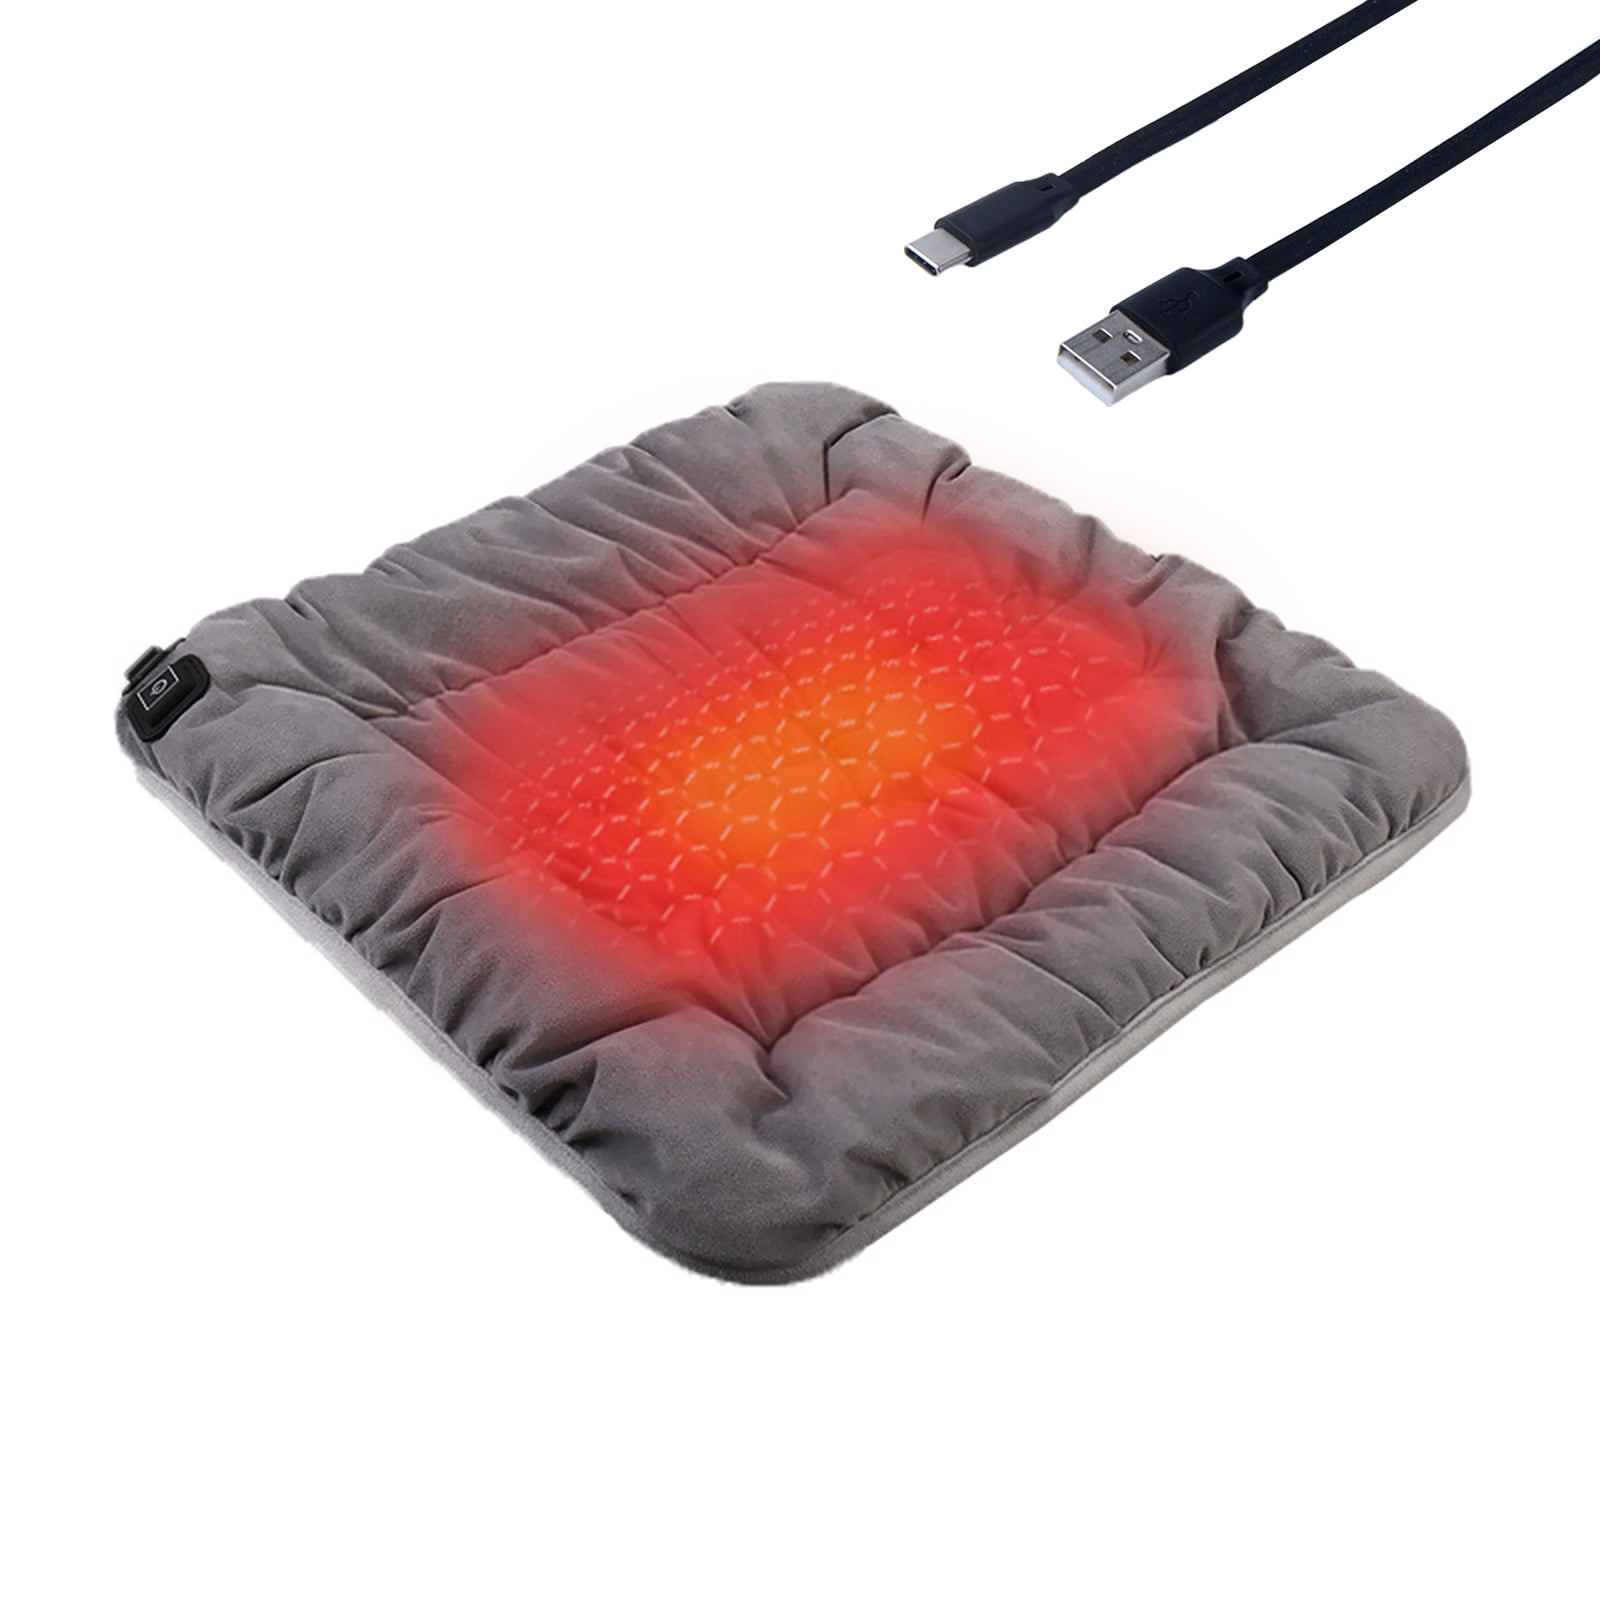 MAXCOM Foldable Heated Seat Cushion for Hips, Heating Chair Pad, 3  Temperature Settings with USB Port, Light & Portable - Office/Home Use Black